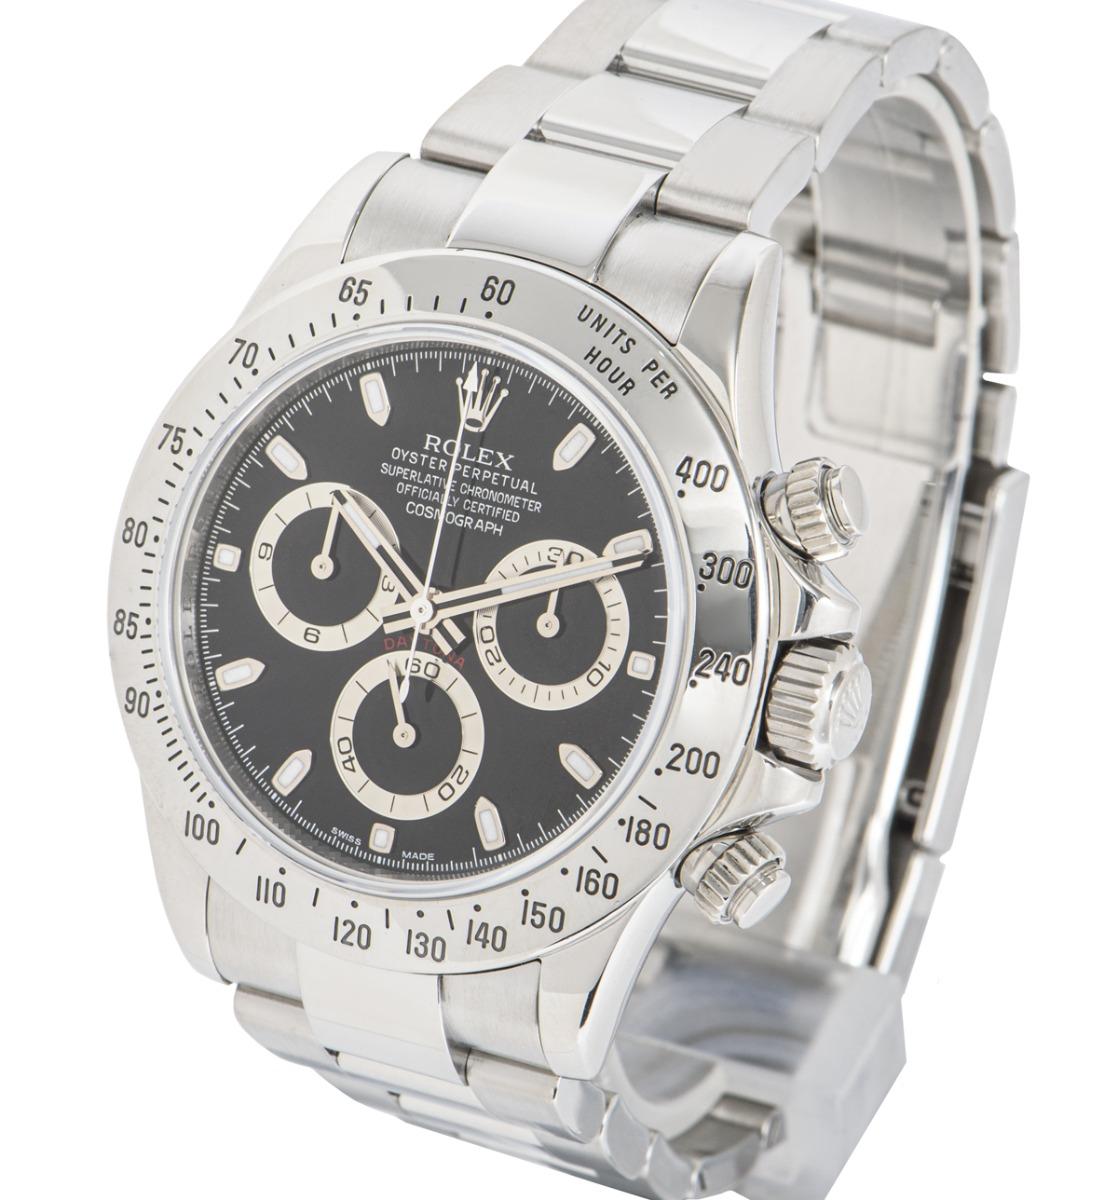 Rolex Daytona NOS APH Black Dial 116520 In New Condition For Sale In London, GB